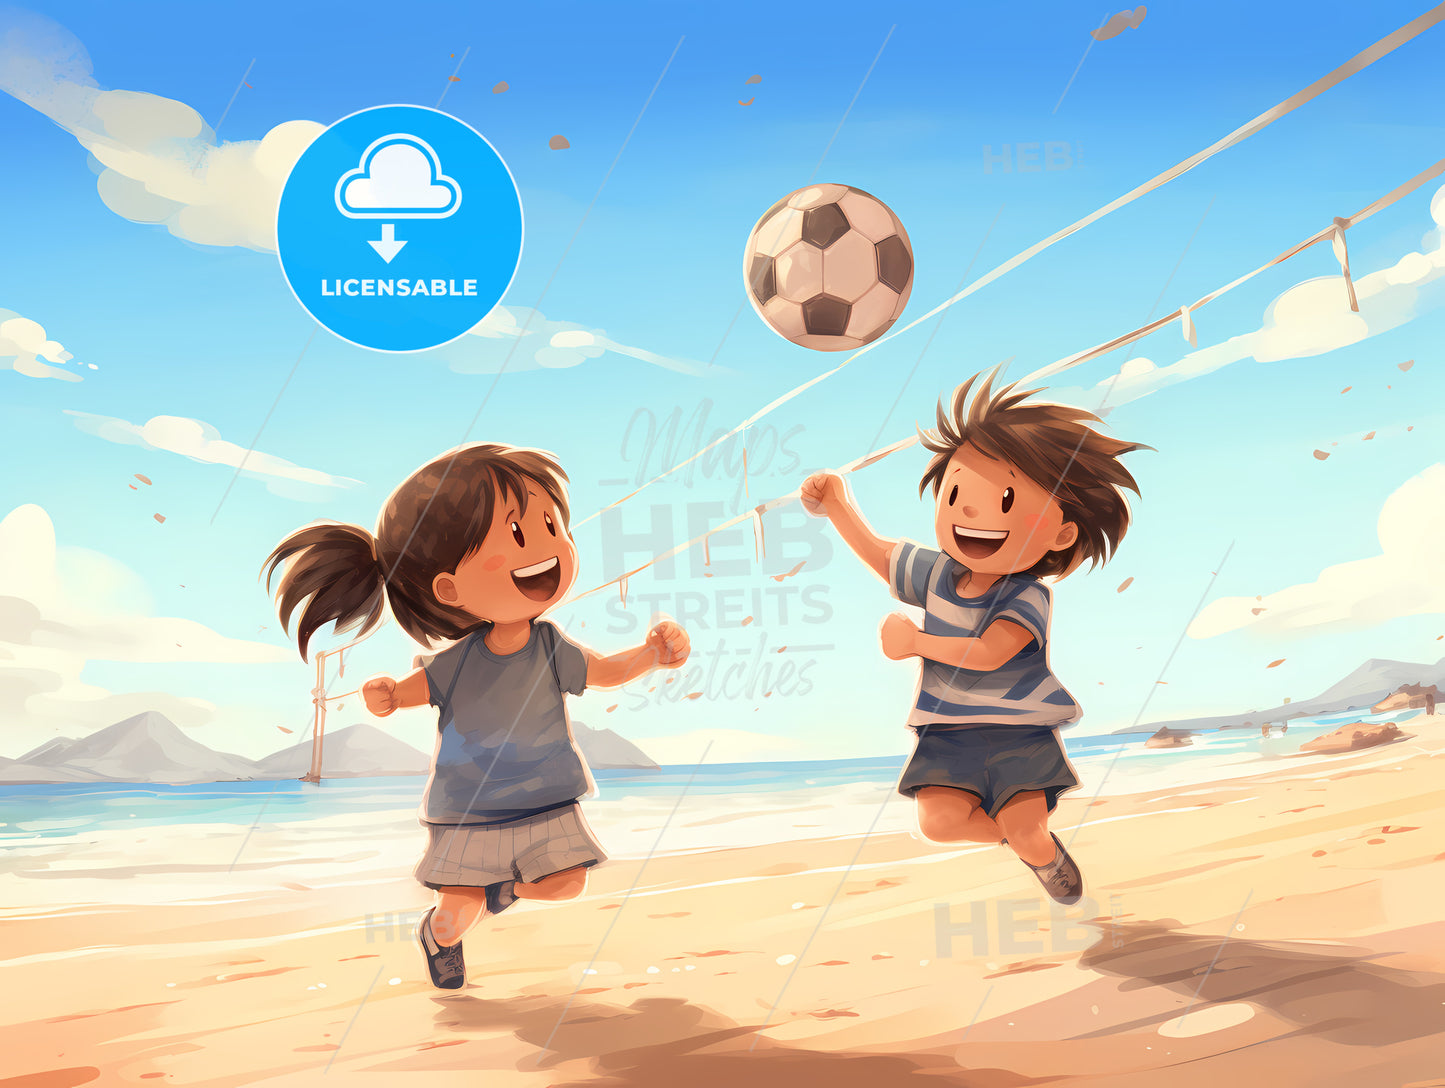 Cartoon Of Kids Playing With A Ball On A Beach